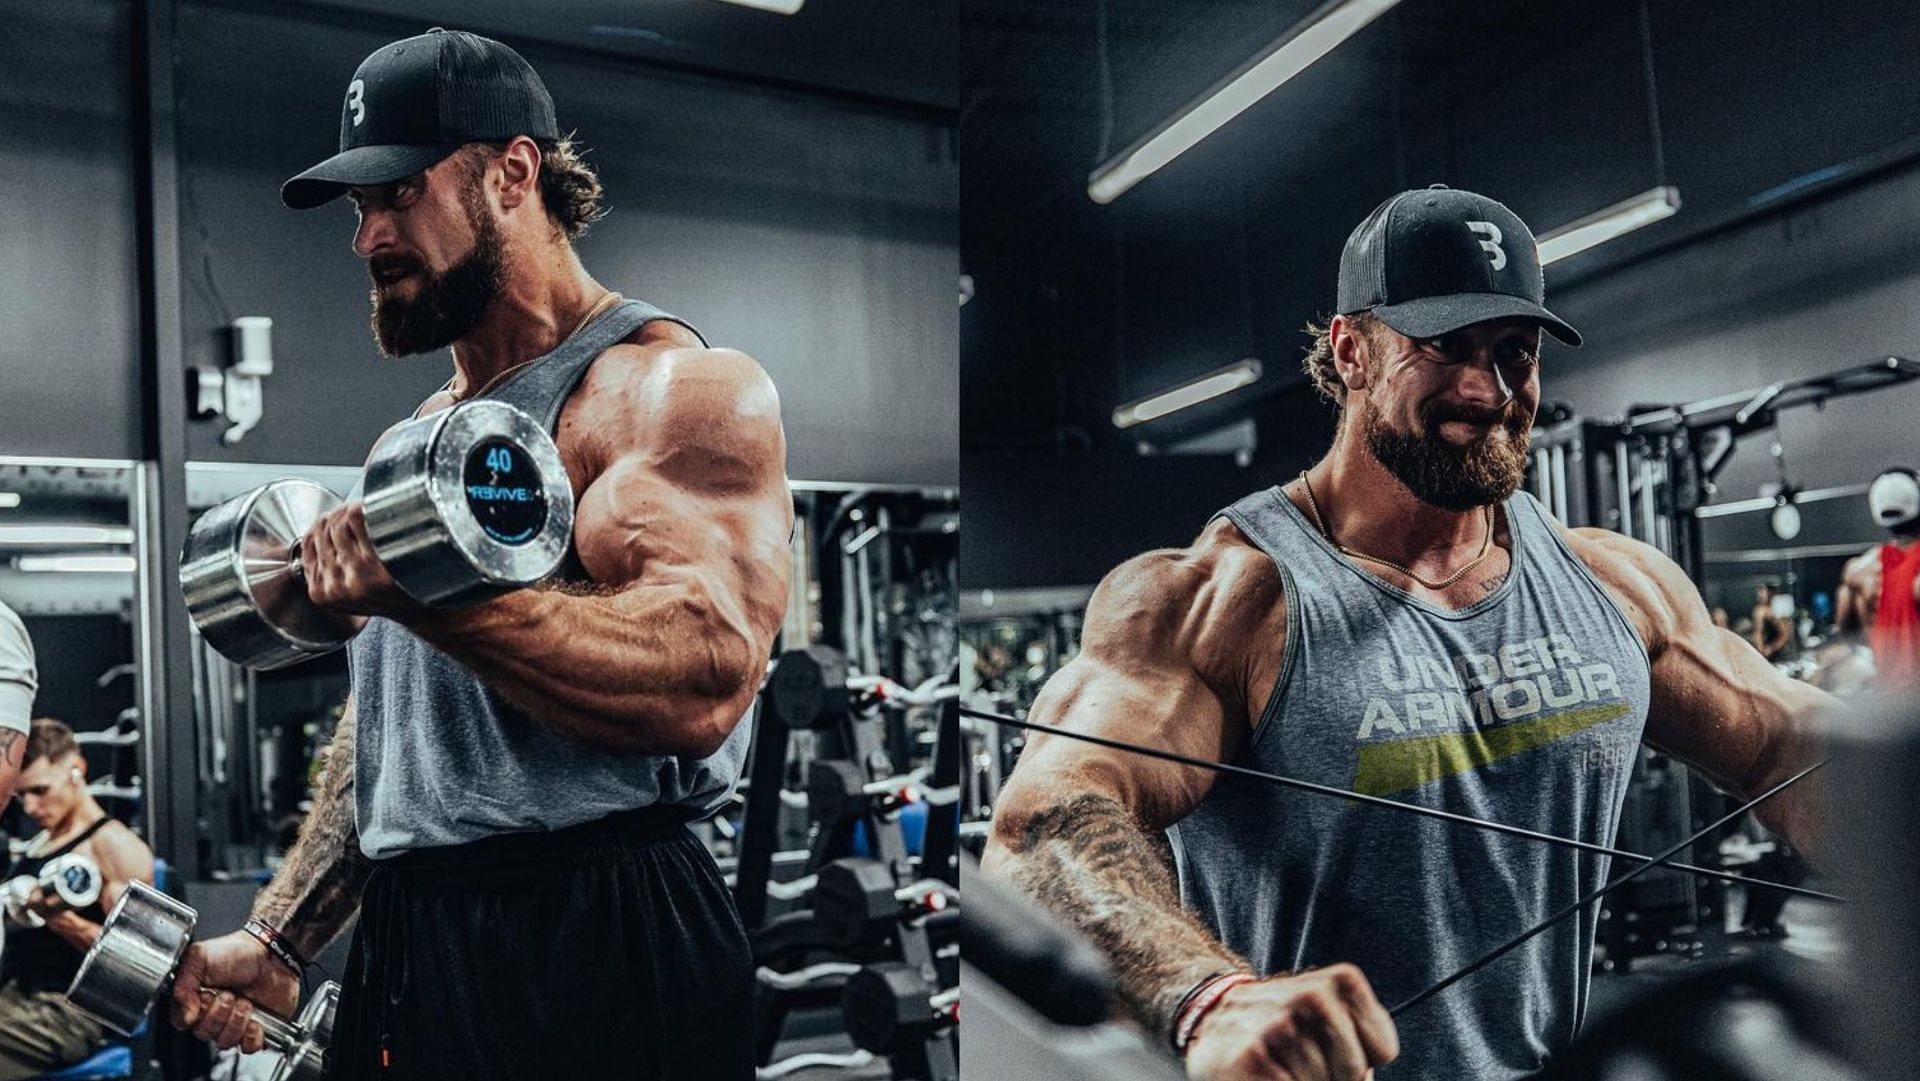 Chris Bumstead Trains Arms WIth FST-7 (Image via Instagram @cbum)